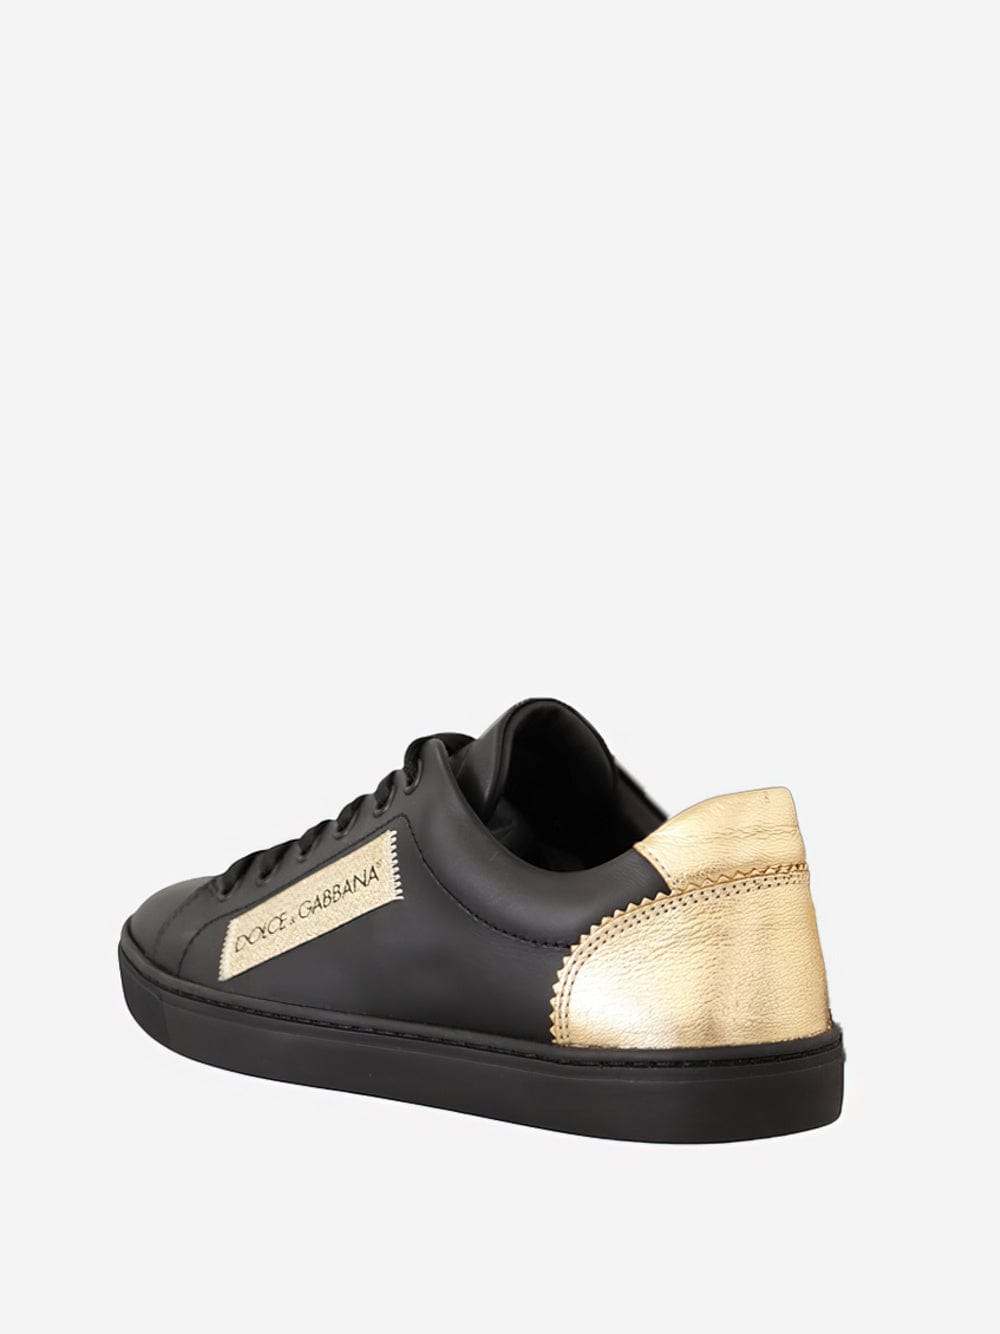 Dolce & Gabbana Logo Low-Top Leather Sneakers